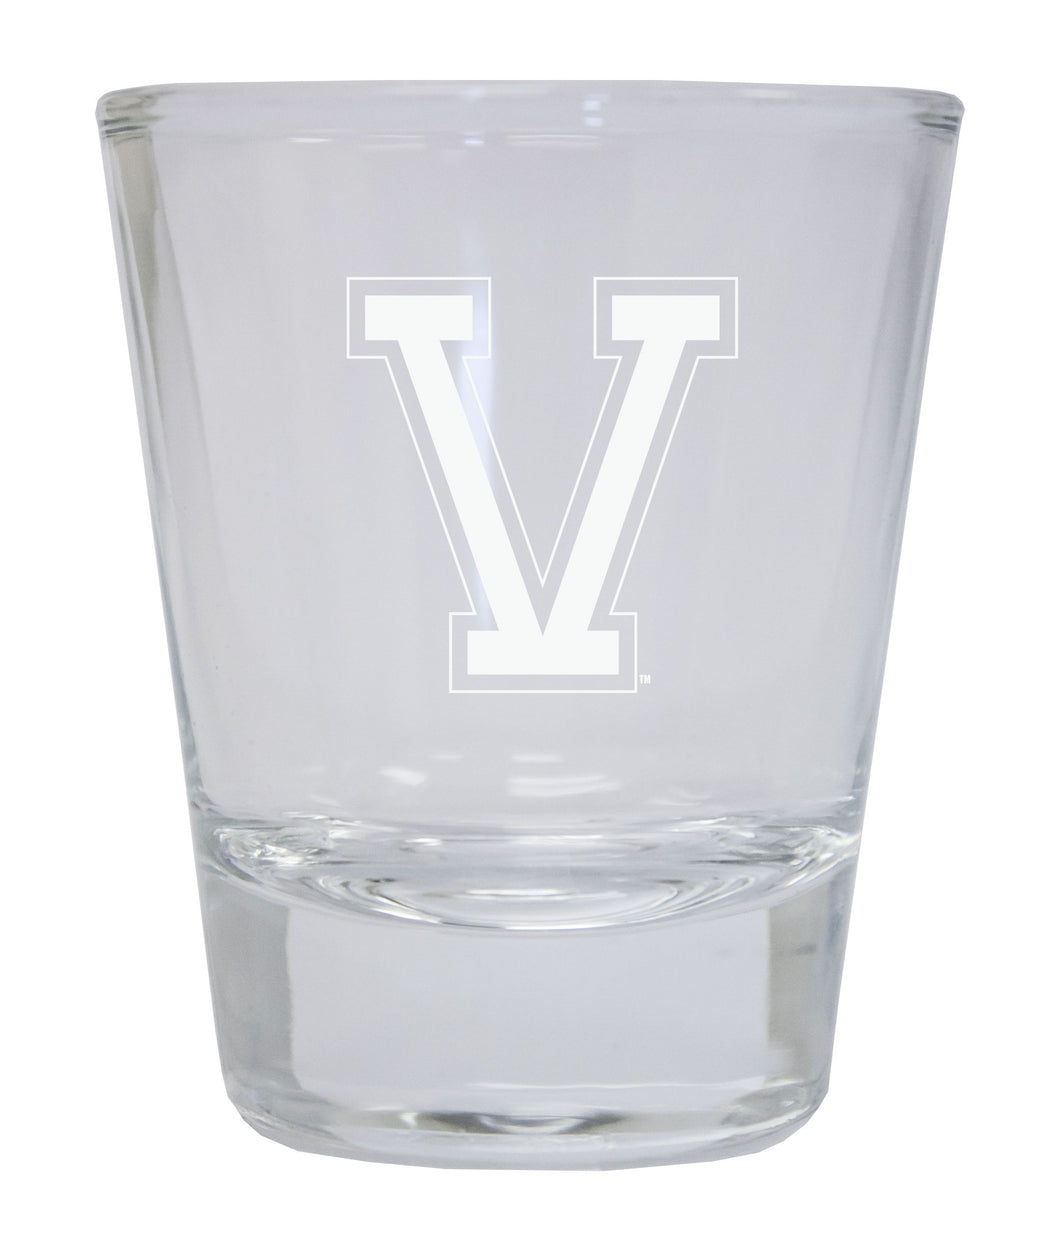 Vermont Catamounts Etched Round Shot Glass Officially Licensed Collegiate Product